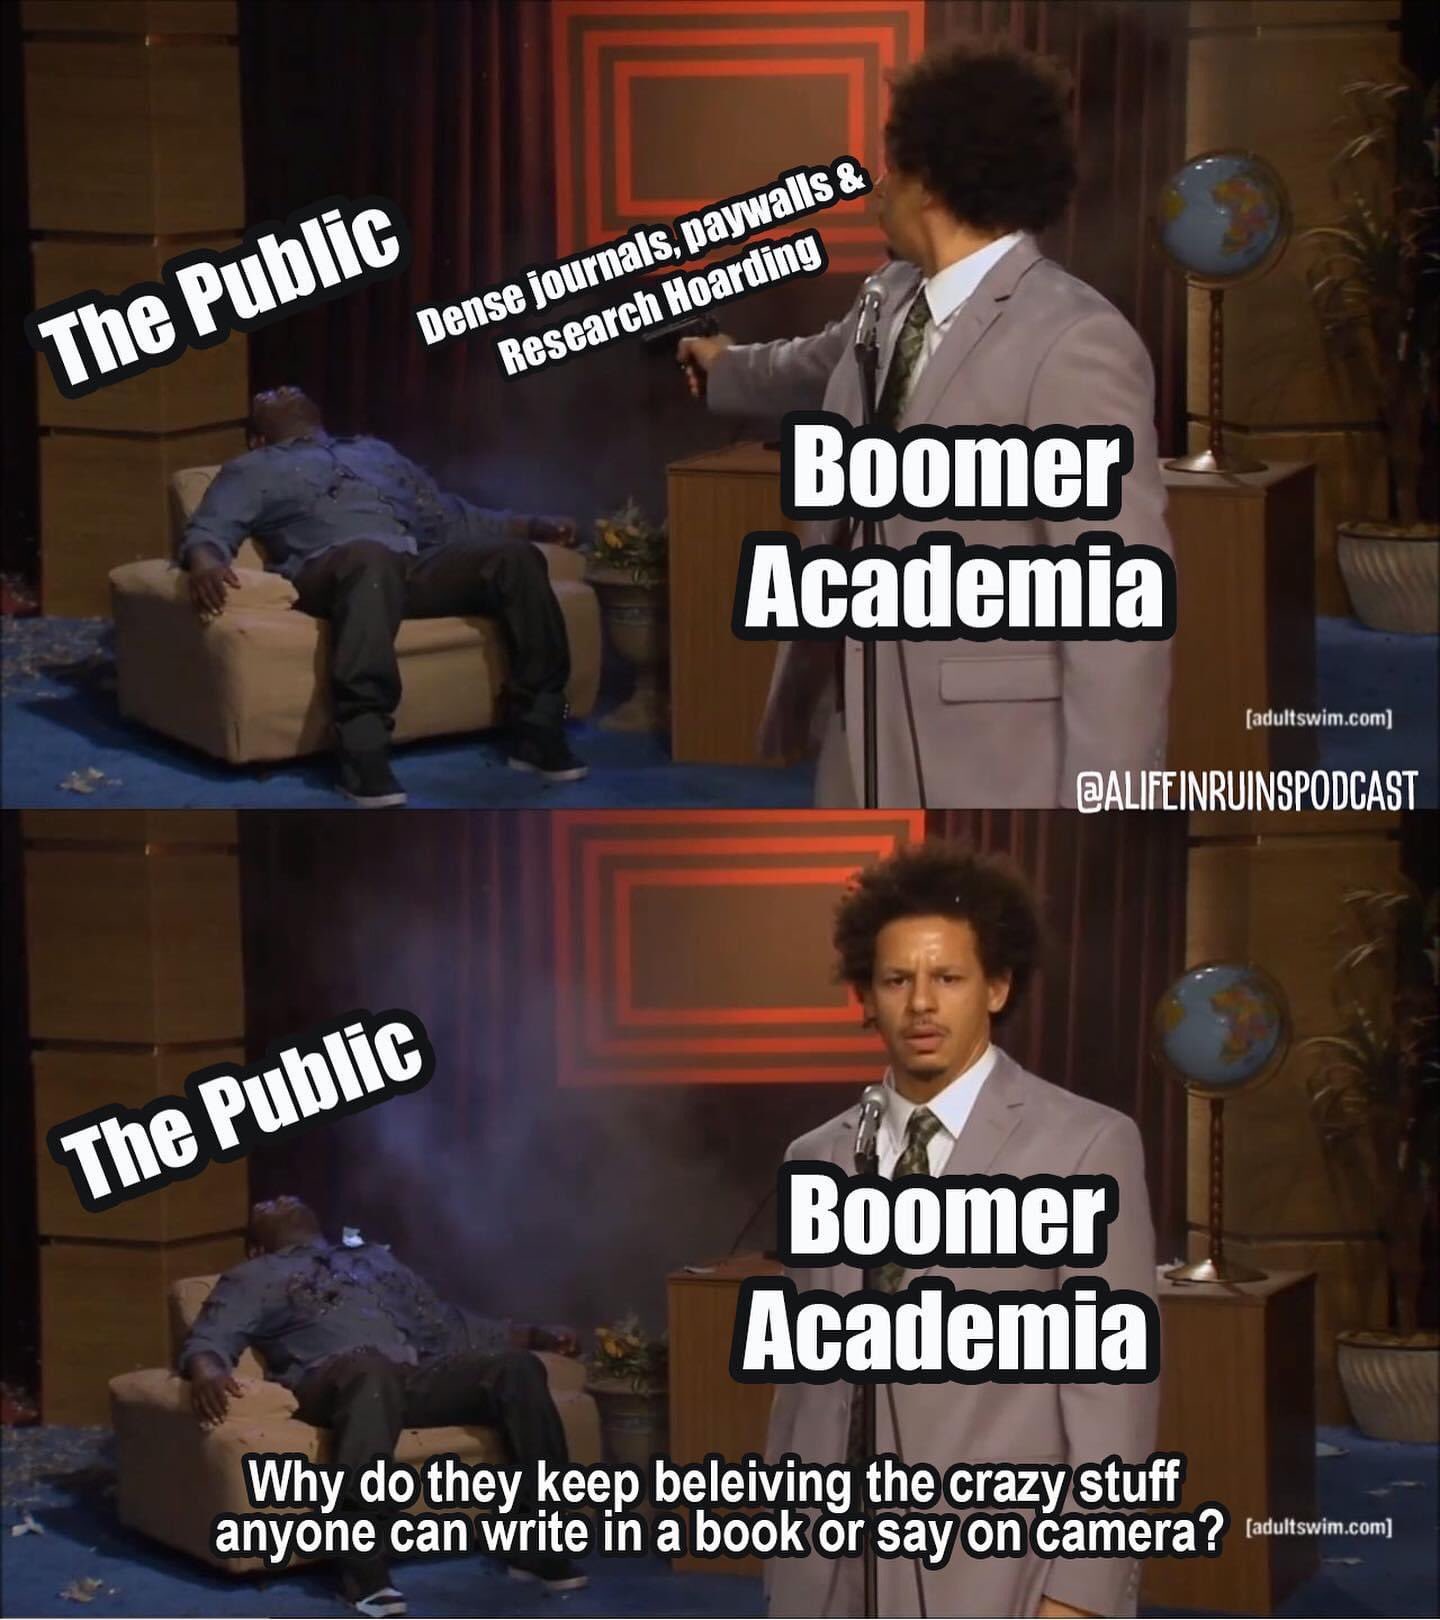 r/collegememes- college dank memes - coronavirus strikes again meme - The Public Dense journals, paywalls & Research Hoarding Boomer Academia adultswim.com The Public Boomer Academia Why do they keep beleiving the crazy stuff anyone can write in a book or